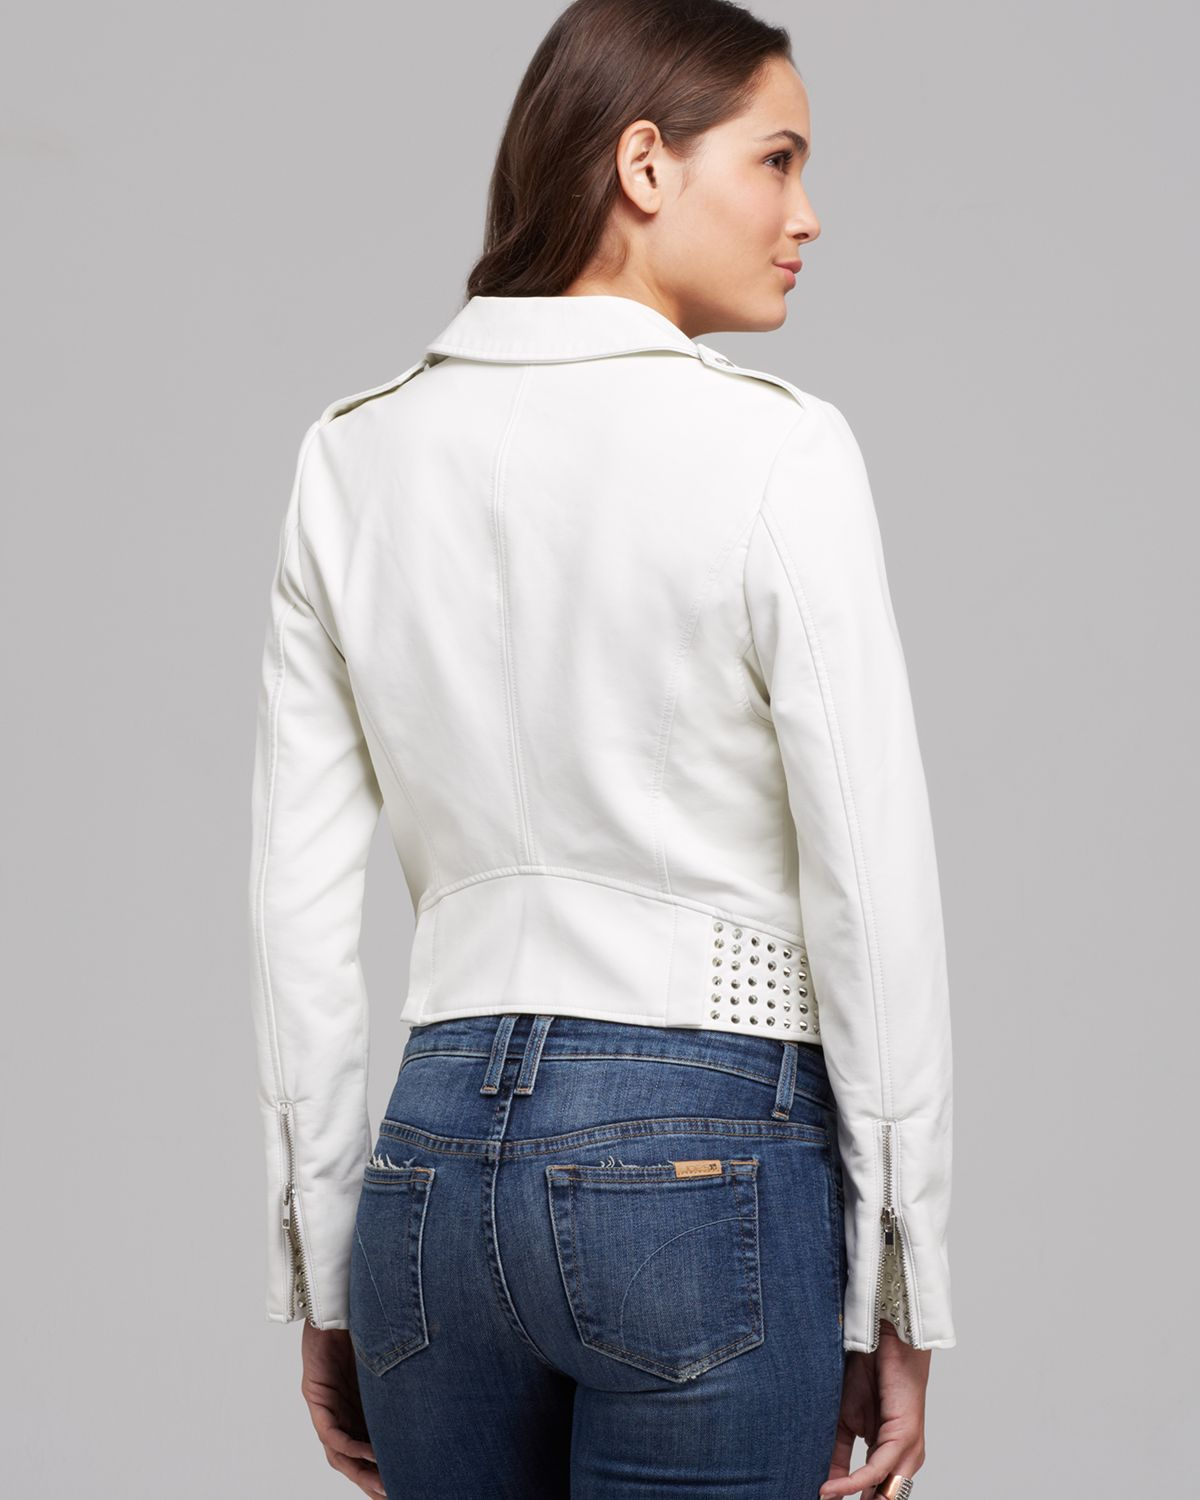 Lyst - Guess Jacket Faux Leather Moto Crop in White